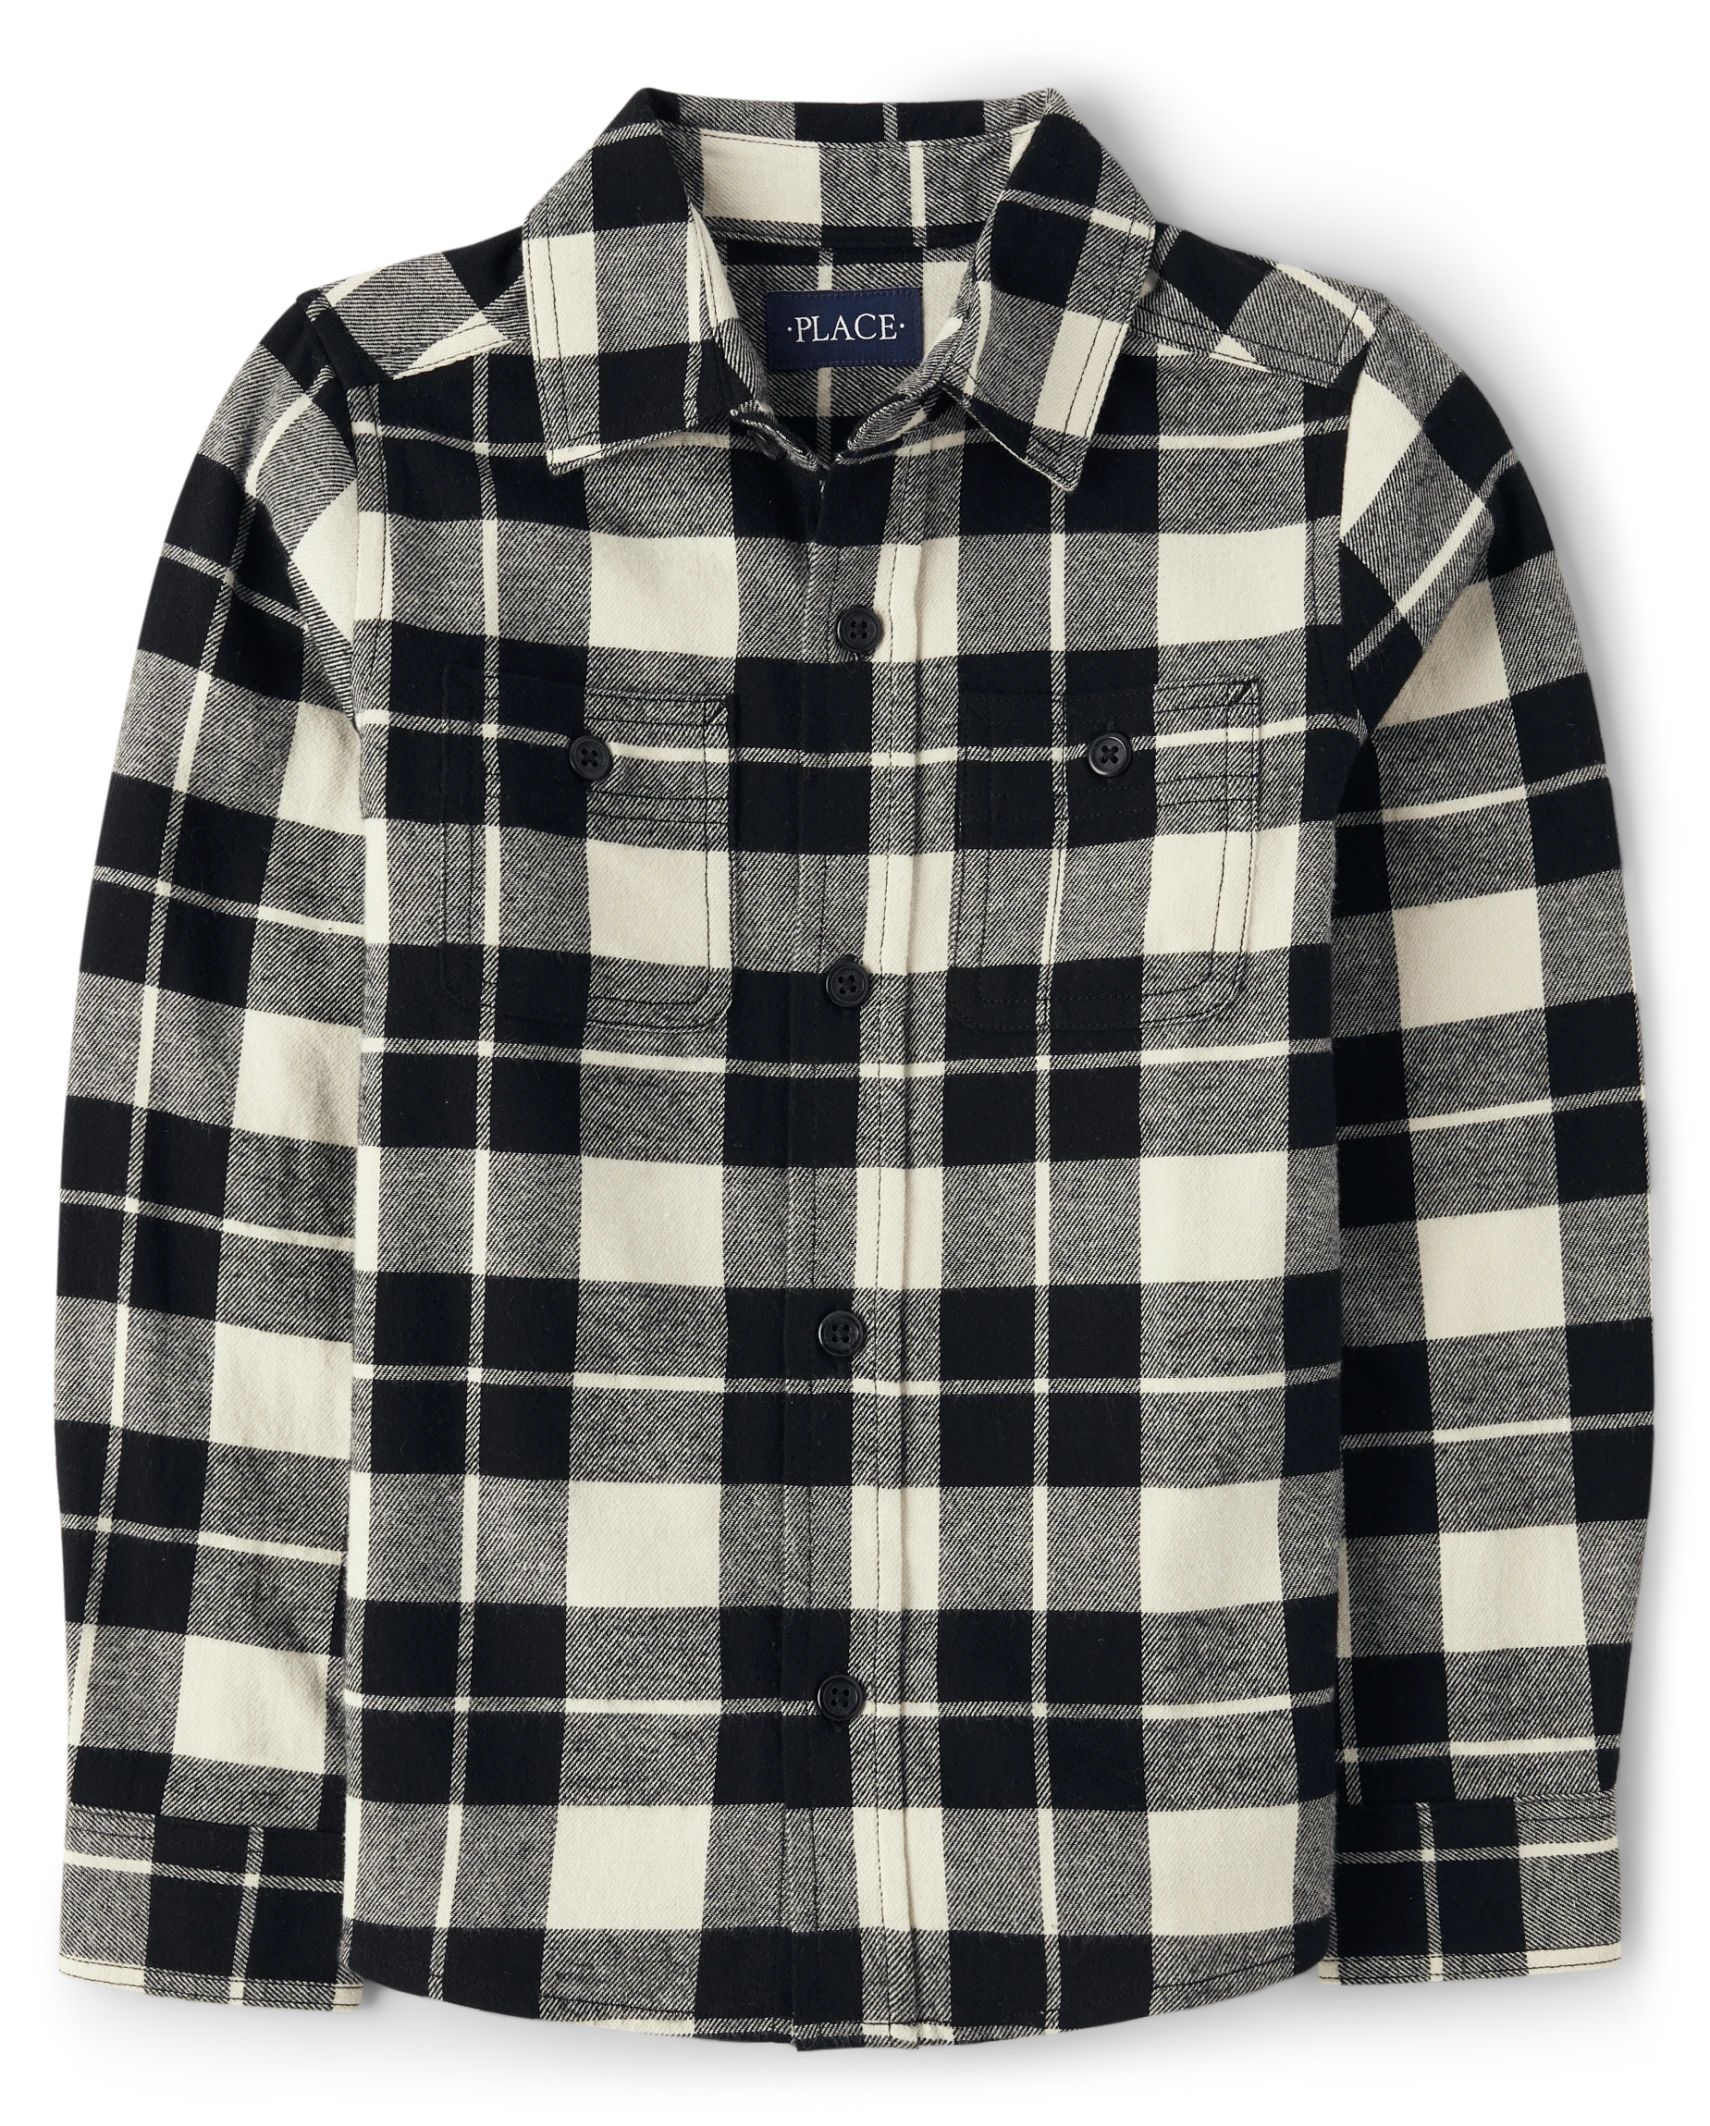 Boys Matching Family Plaid Flannel Button Up Shirt - hay stack | The Children's Place